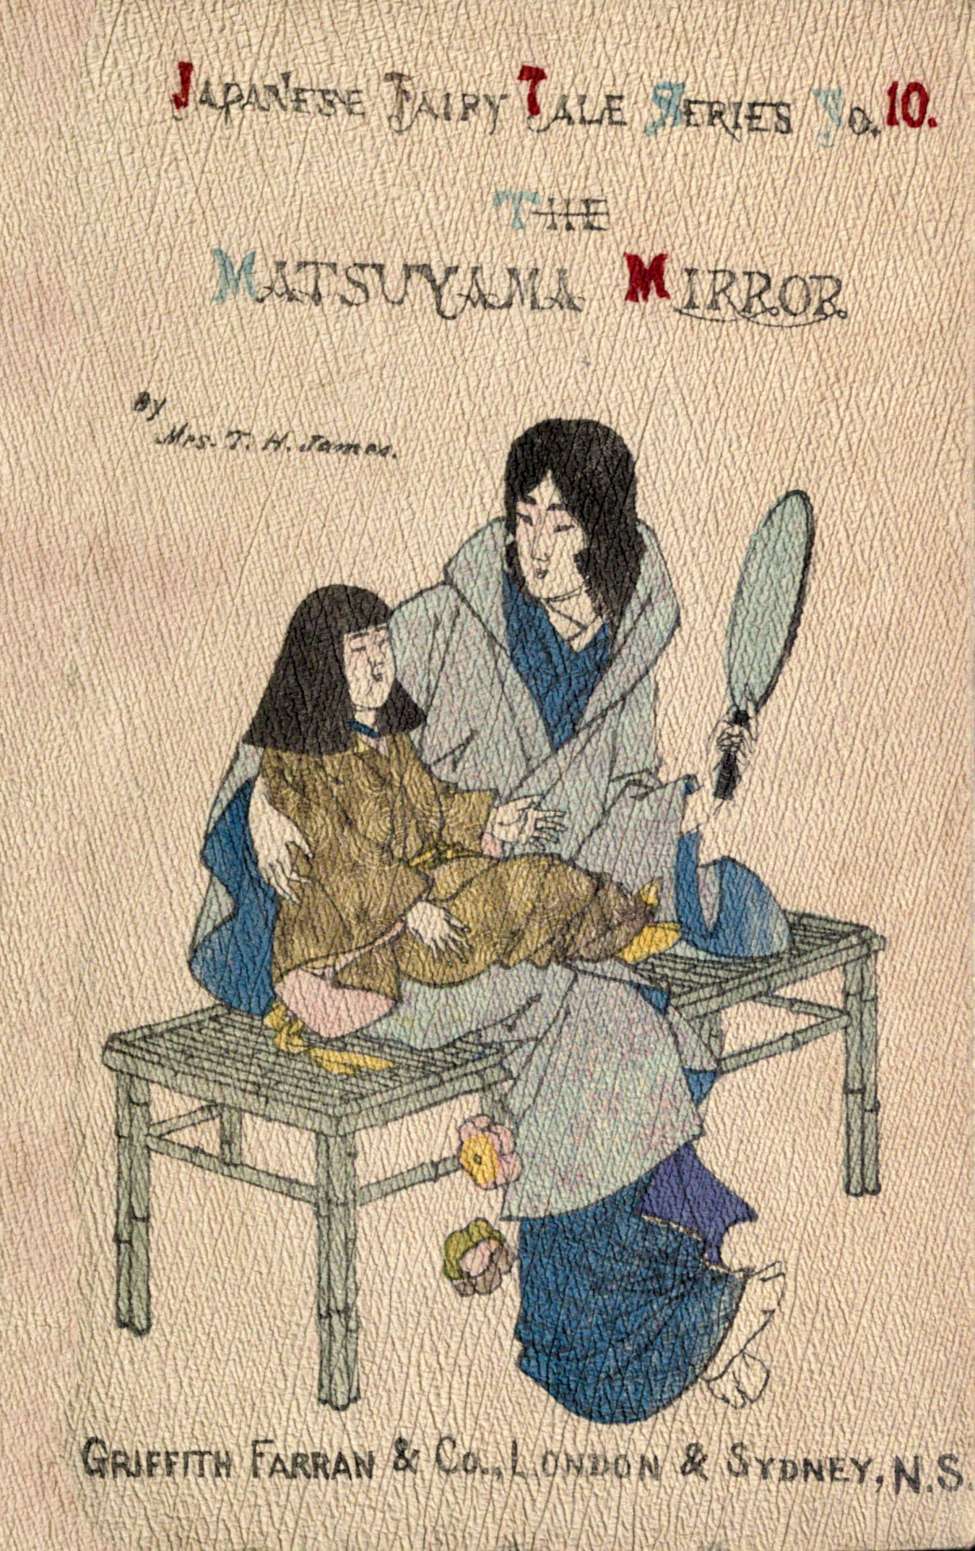 Book Cover For Japanese Fairy Tale Series 10 - Matsuyama Mirror